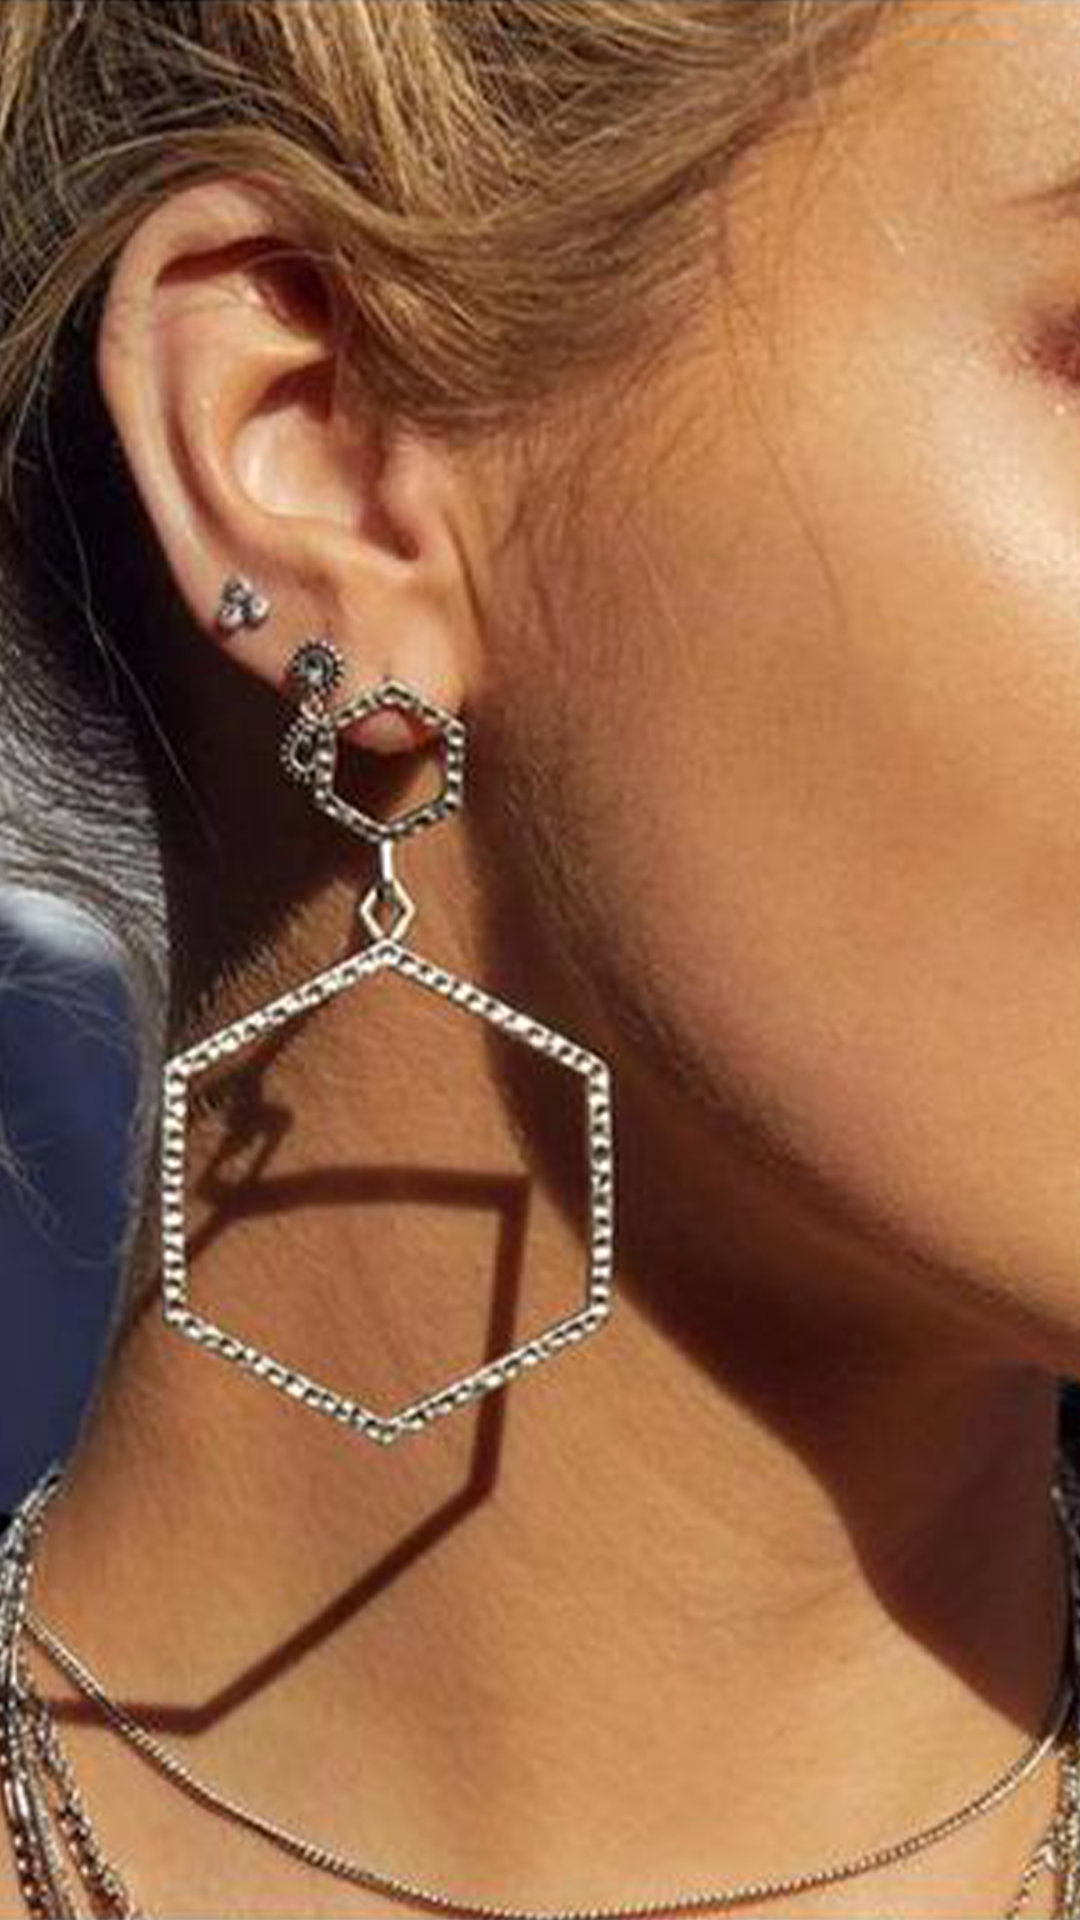 Hammered Hex Statement Earrings, $85